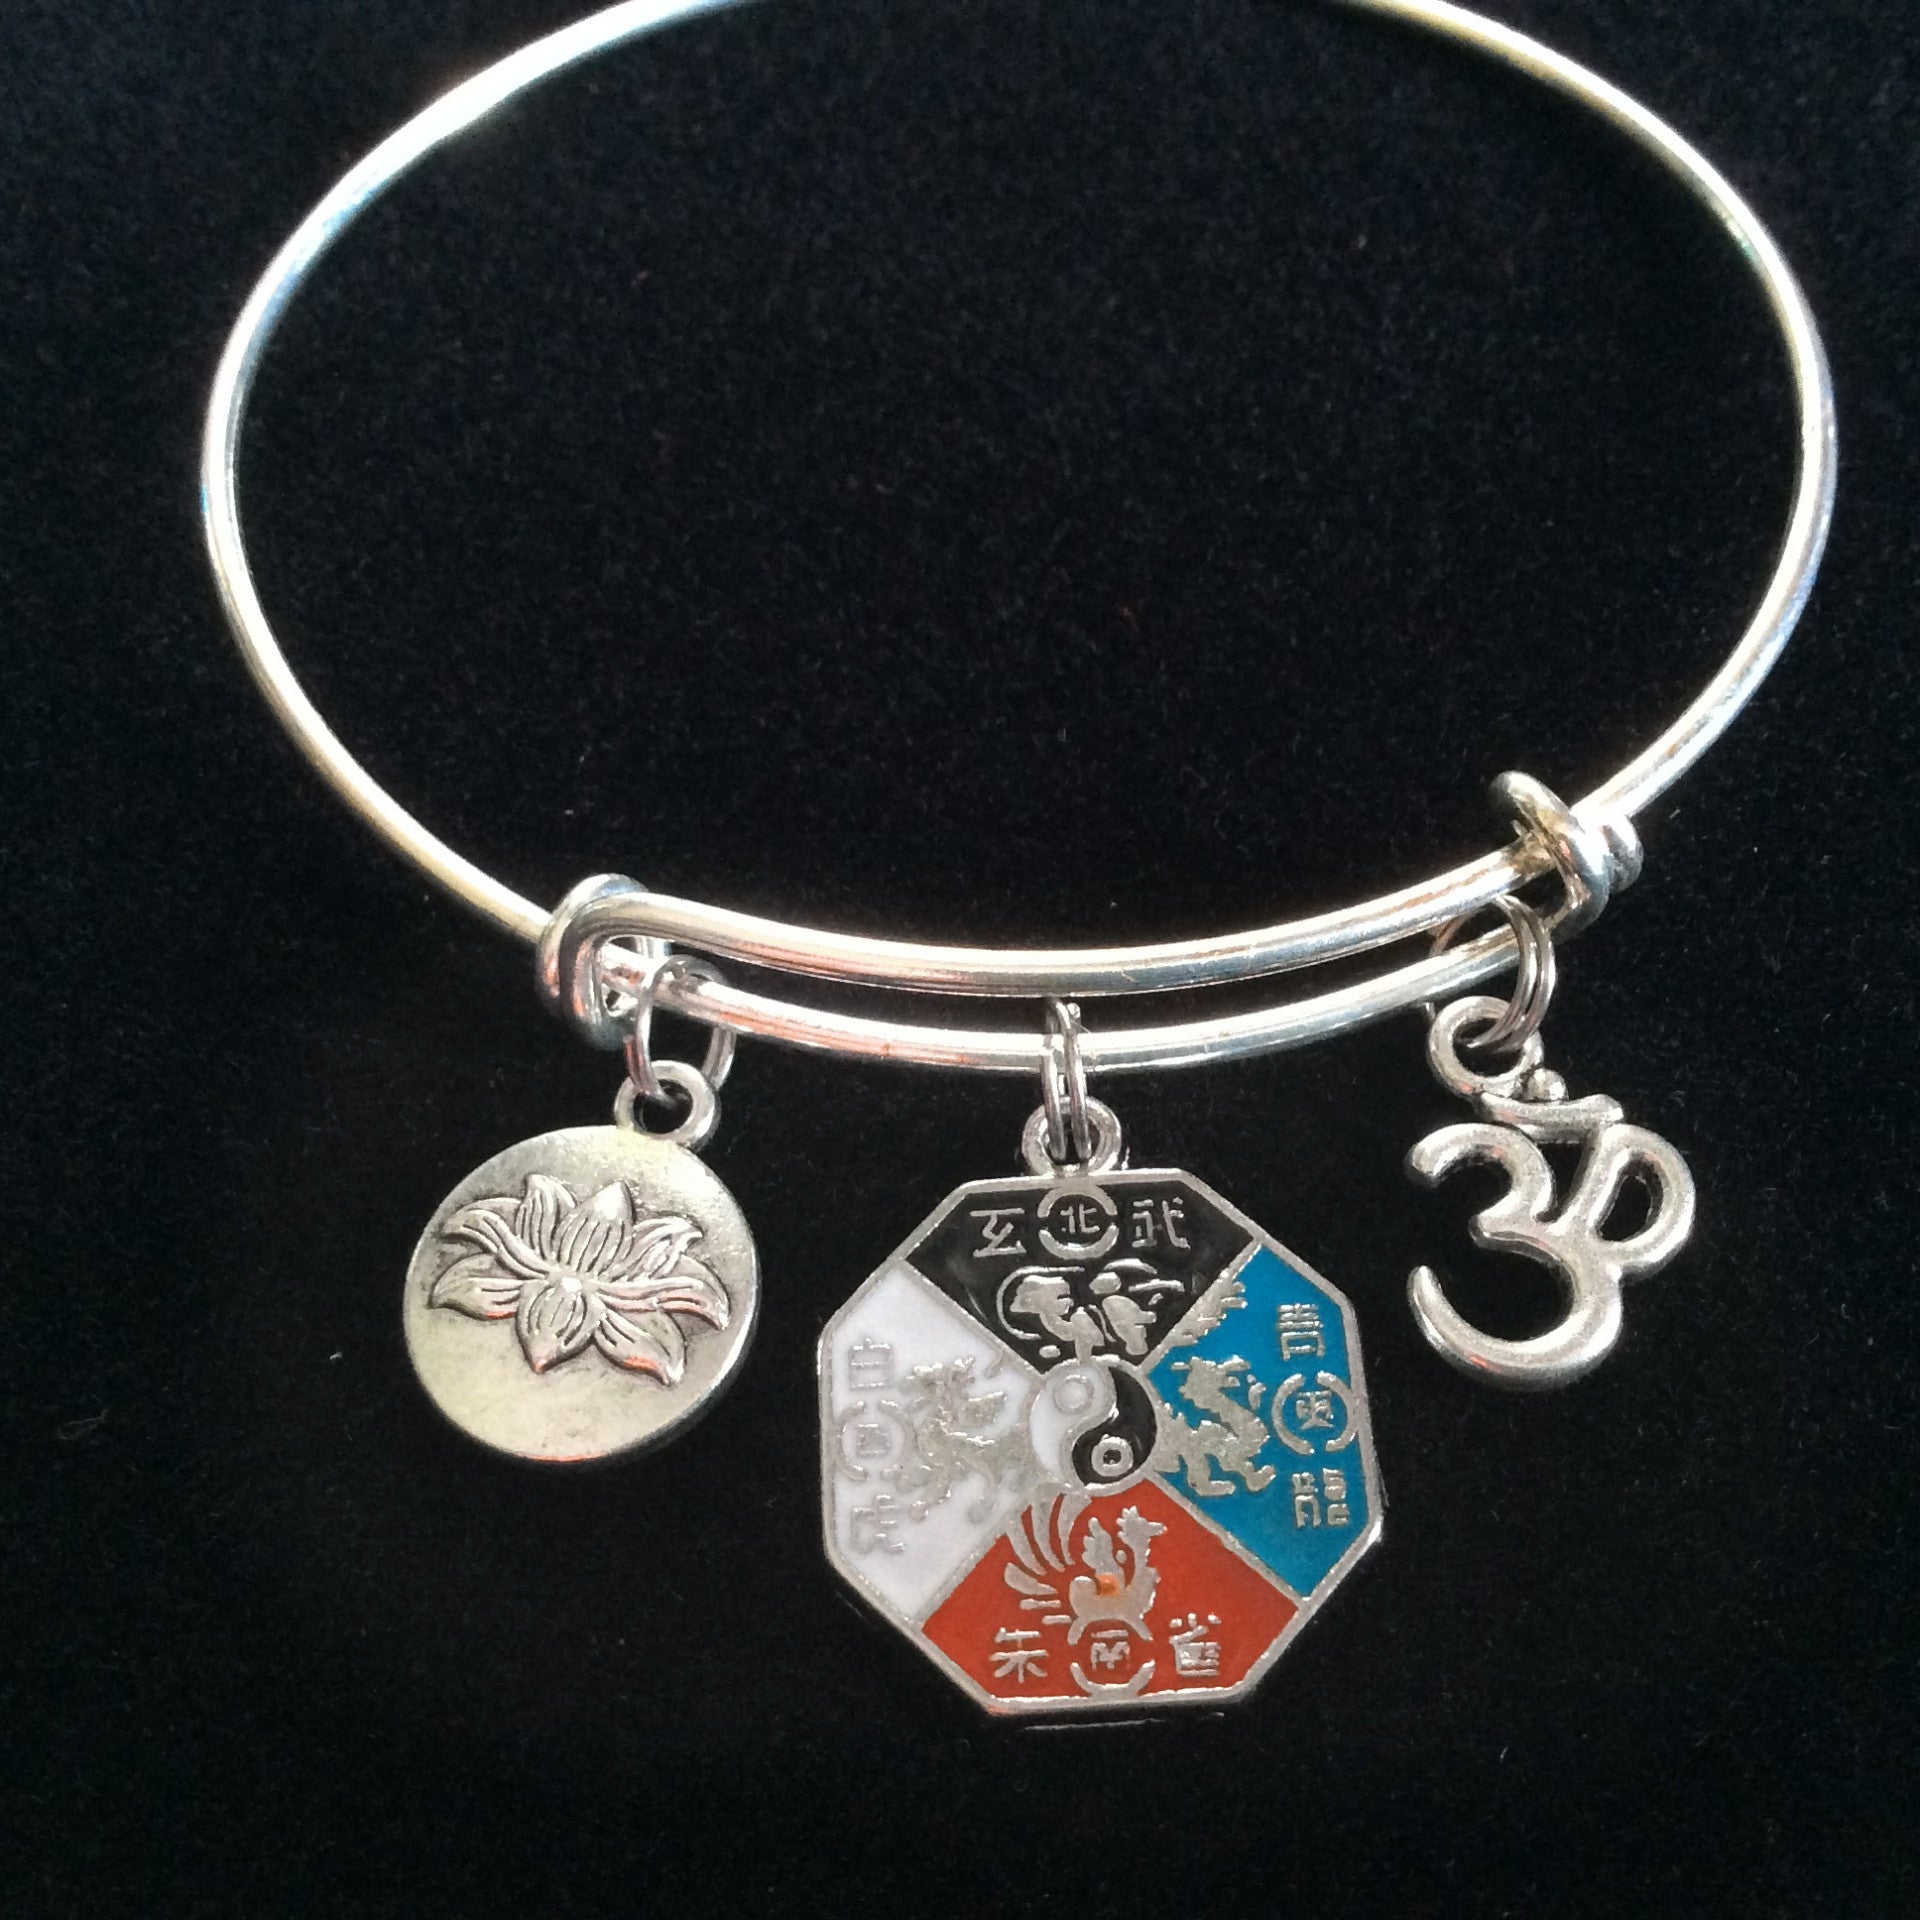 Multicolored Yoga Inspired Zen Medal with Lotus and Om Charm Bracelet ...